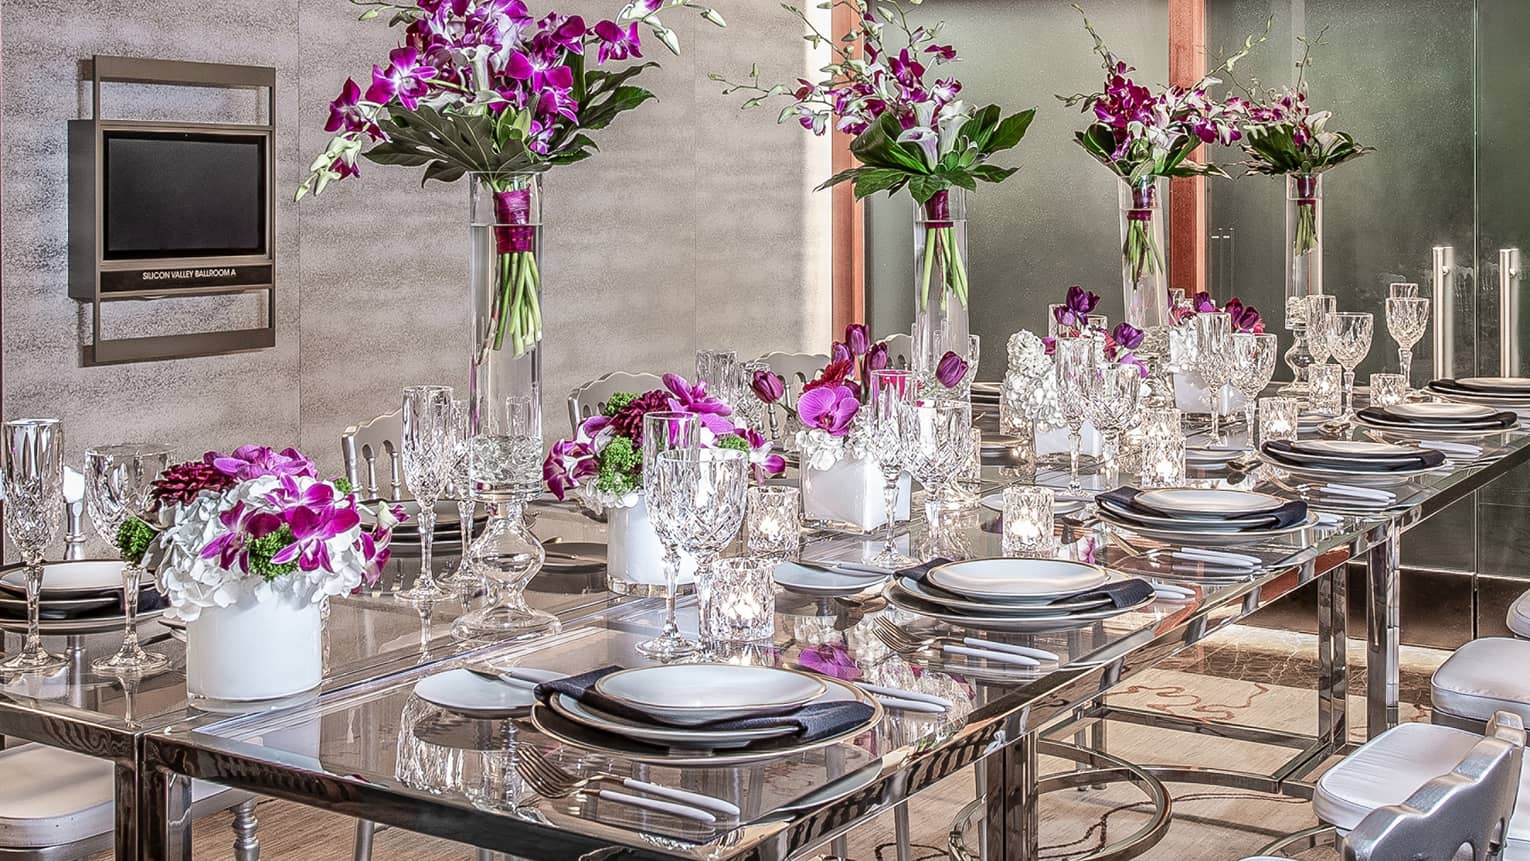 Purple flowers, goblets and place-settings decorate a glass able in an event space